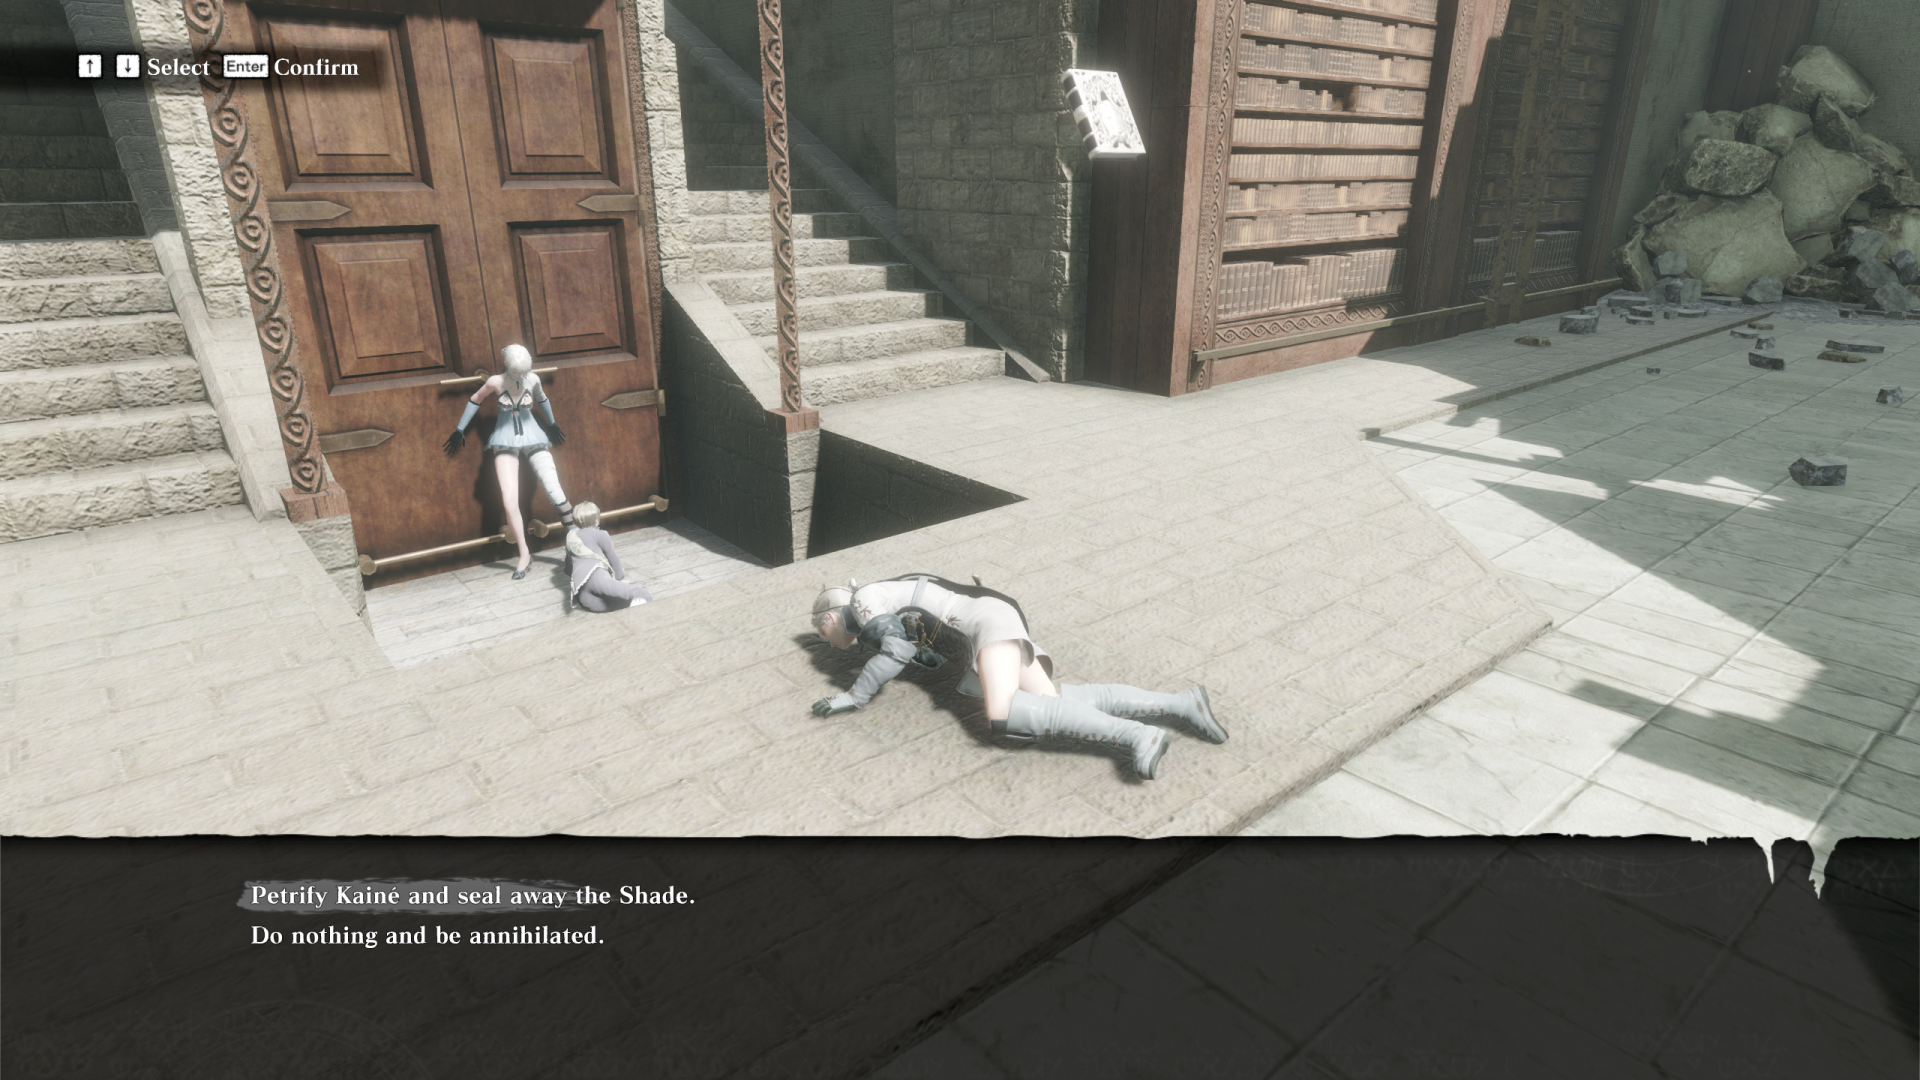 NieR Replicant: ver.1.22474487139… : Once More, with Feeling